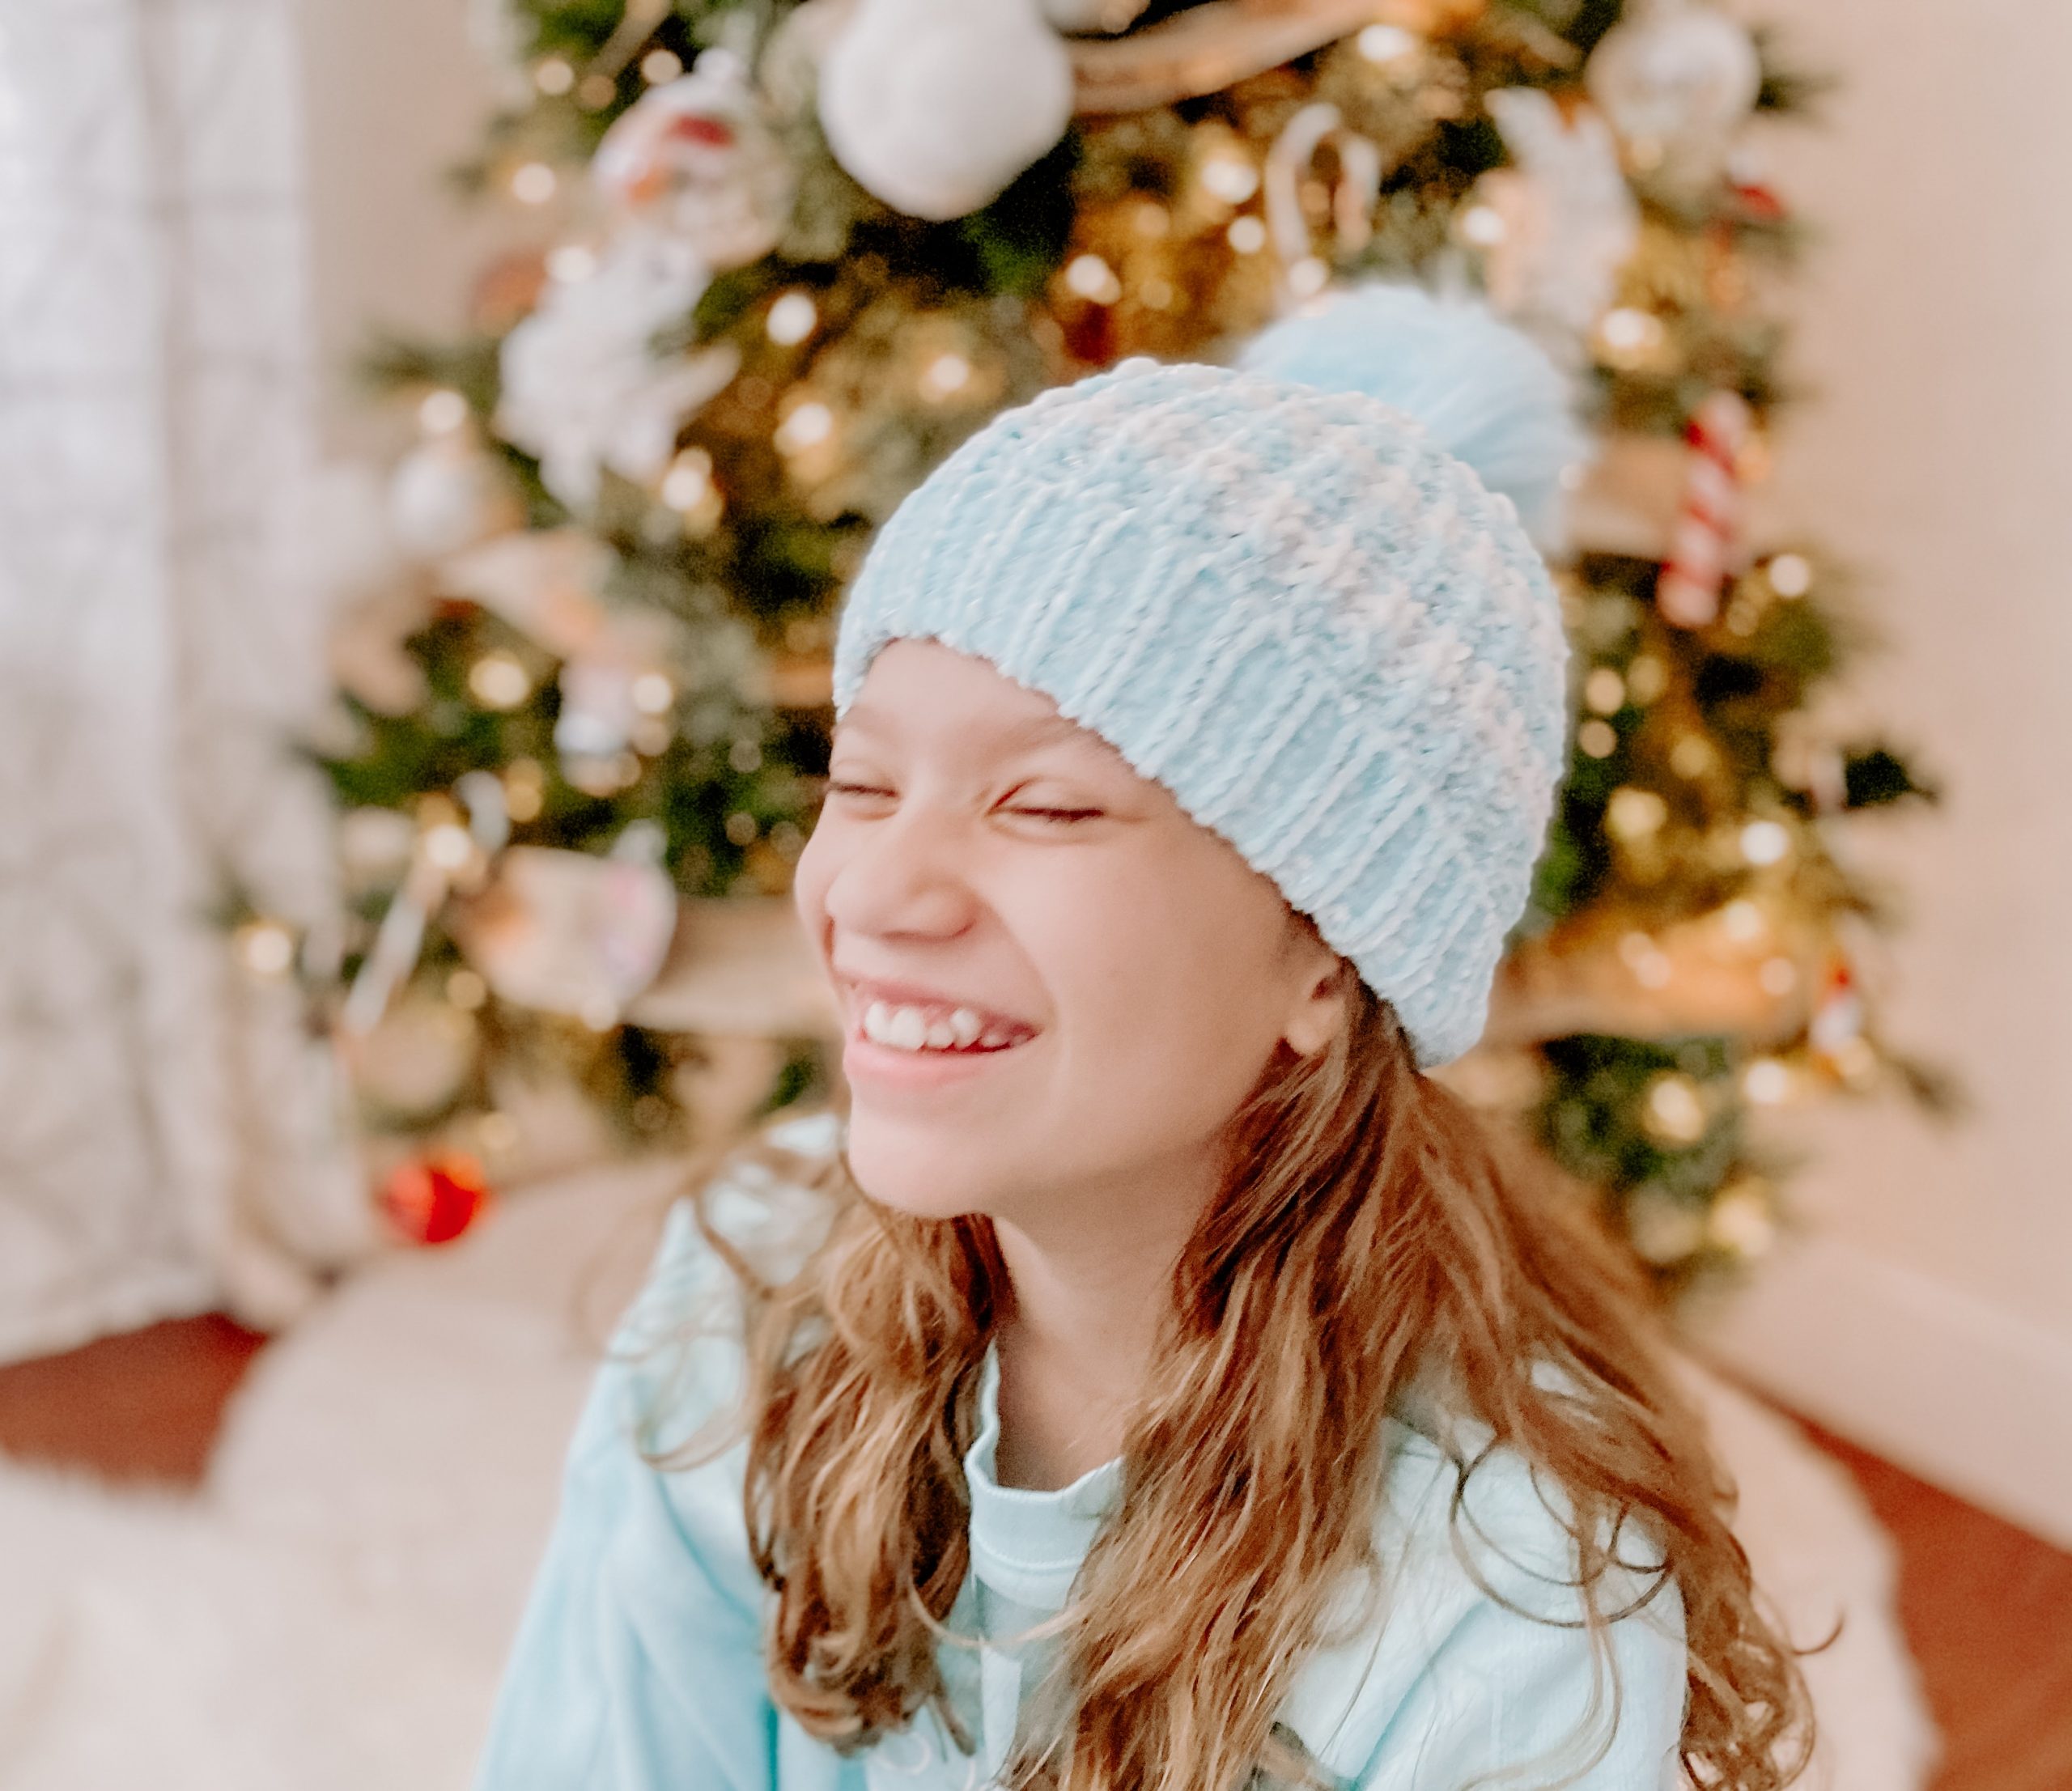 Epic Holiday Gift Ideas for Kids this Year